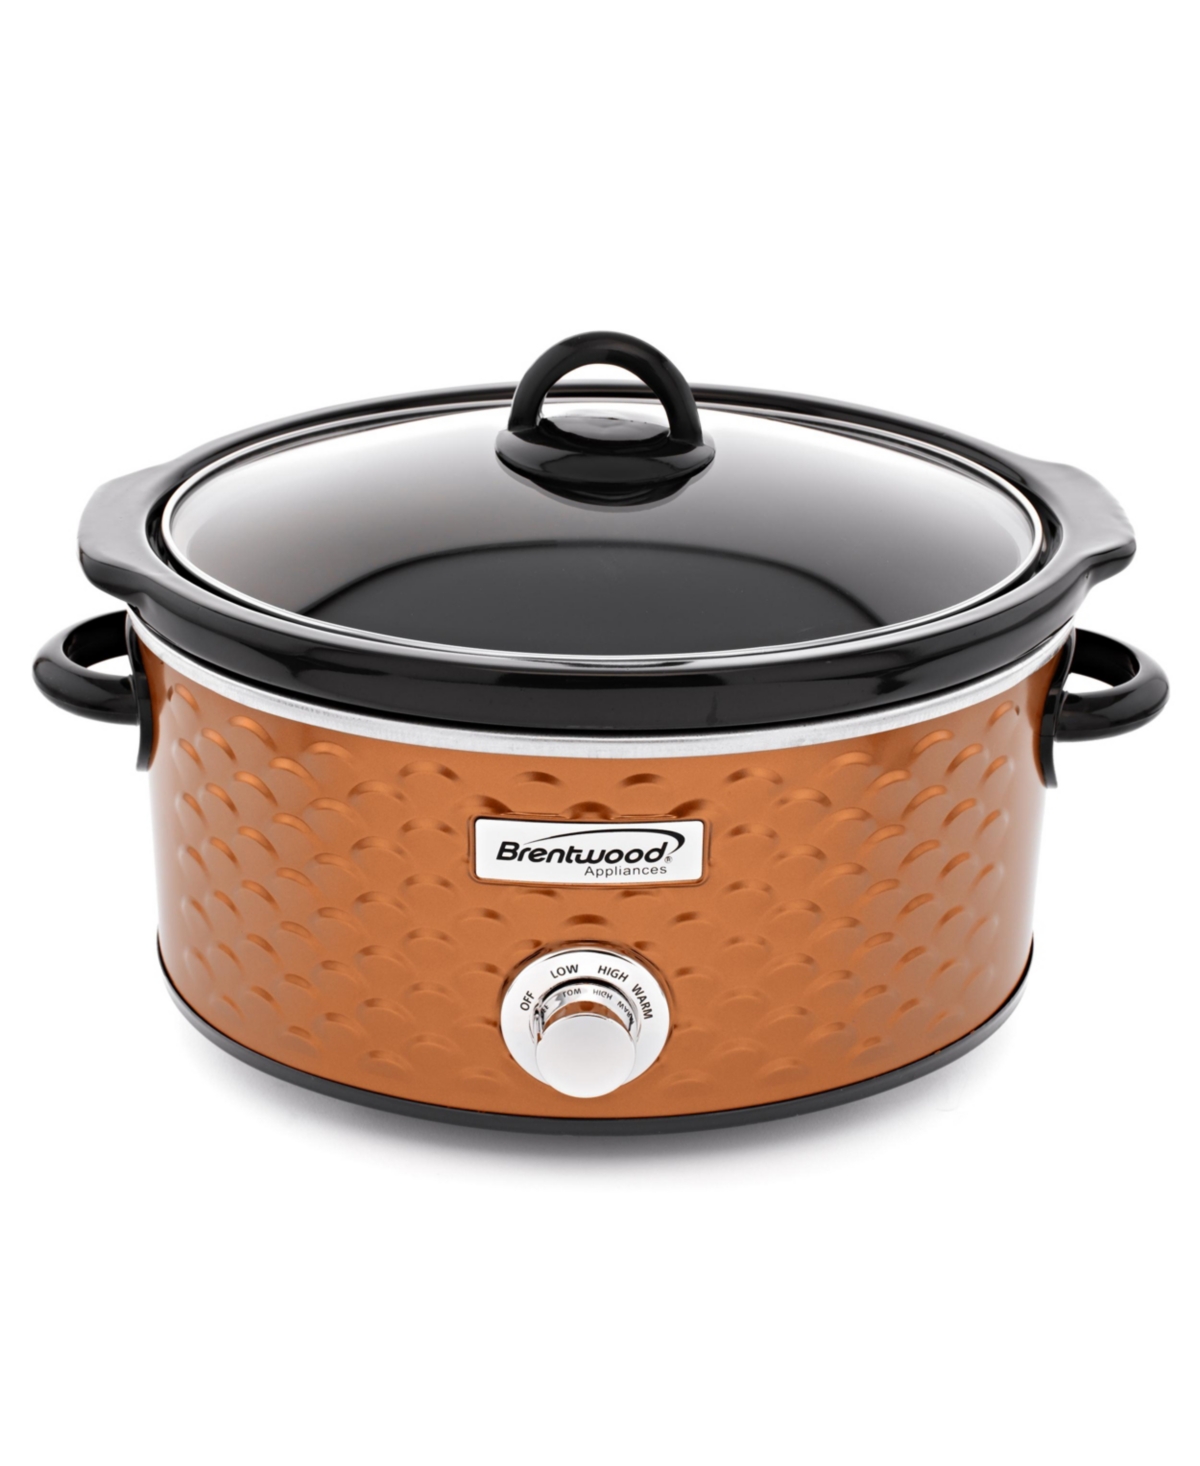 MegaChef Triple 2.5 qt Slow Cooker and Buffet Server in Brushed Copper